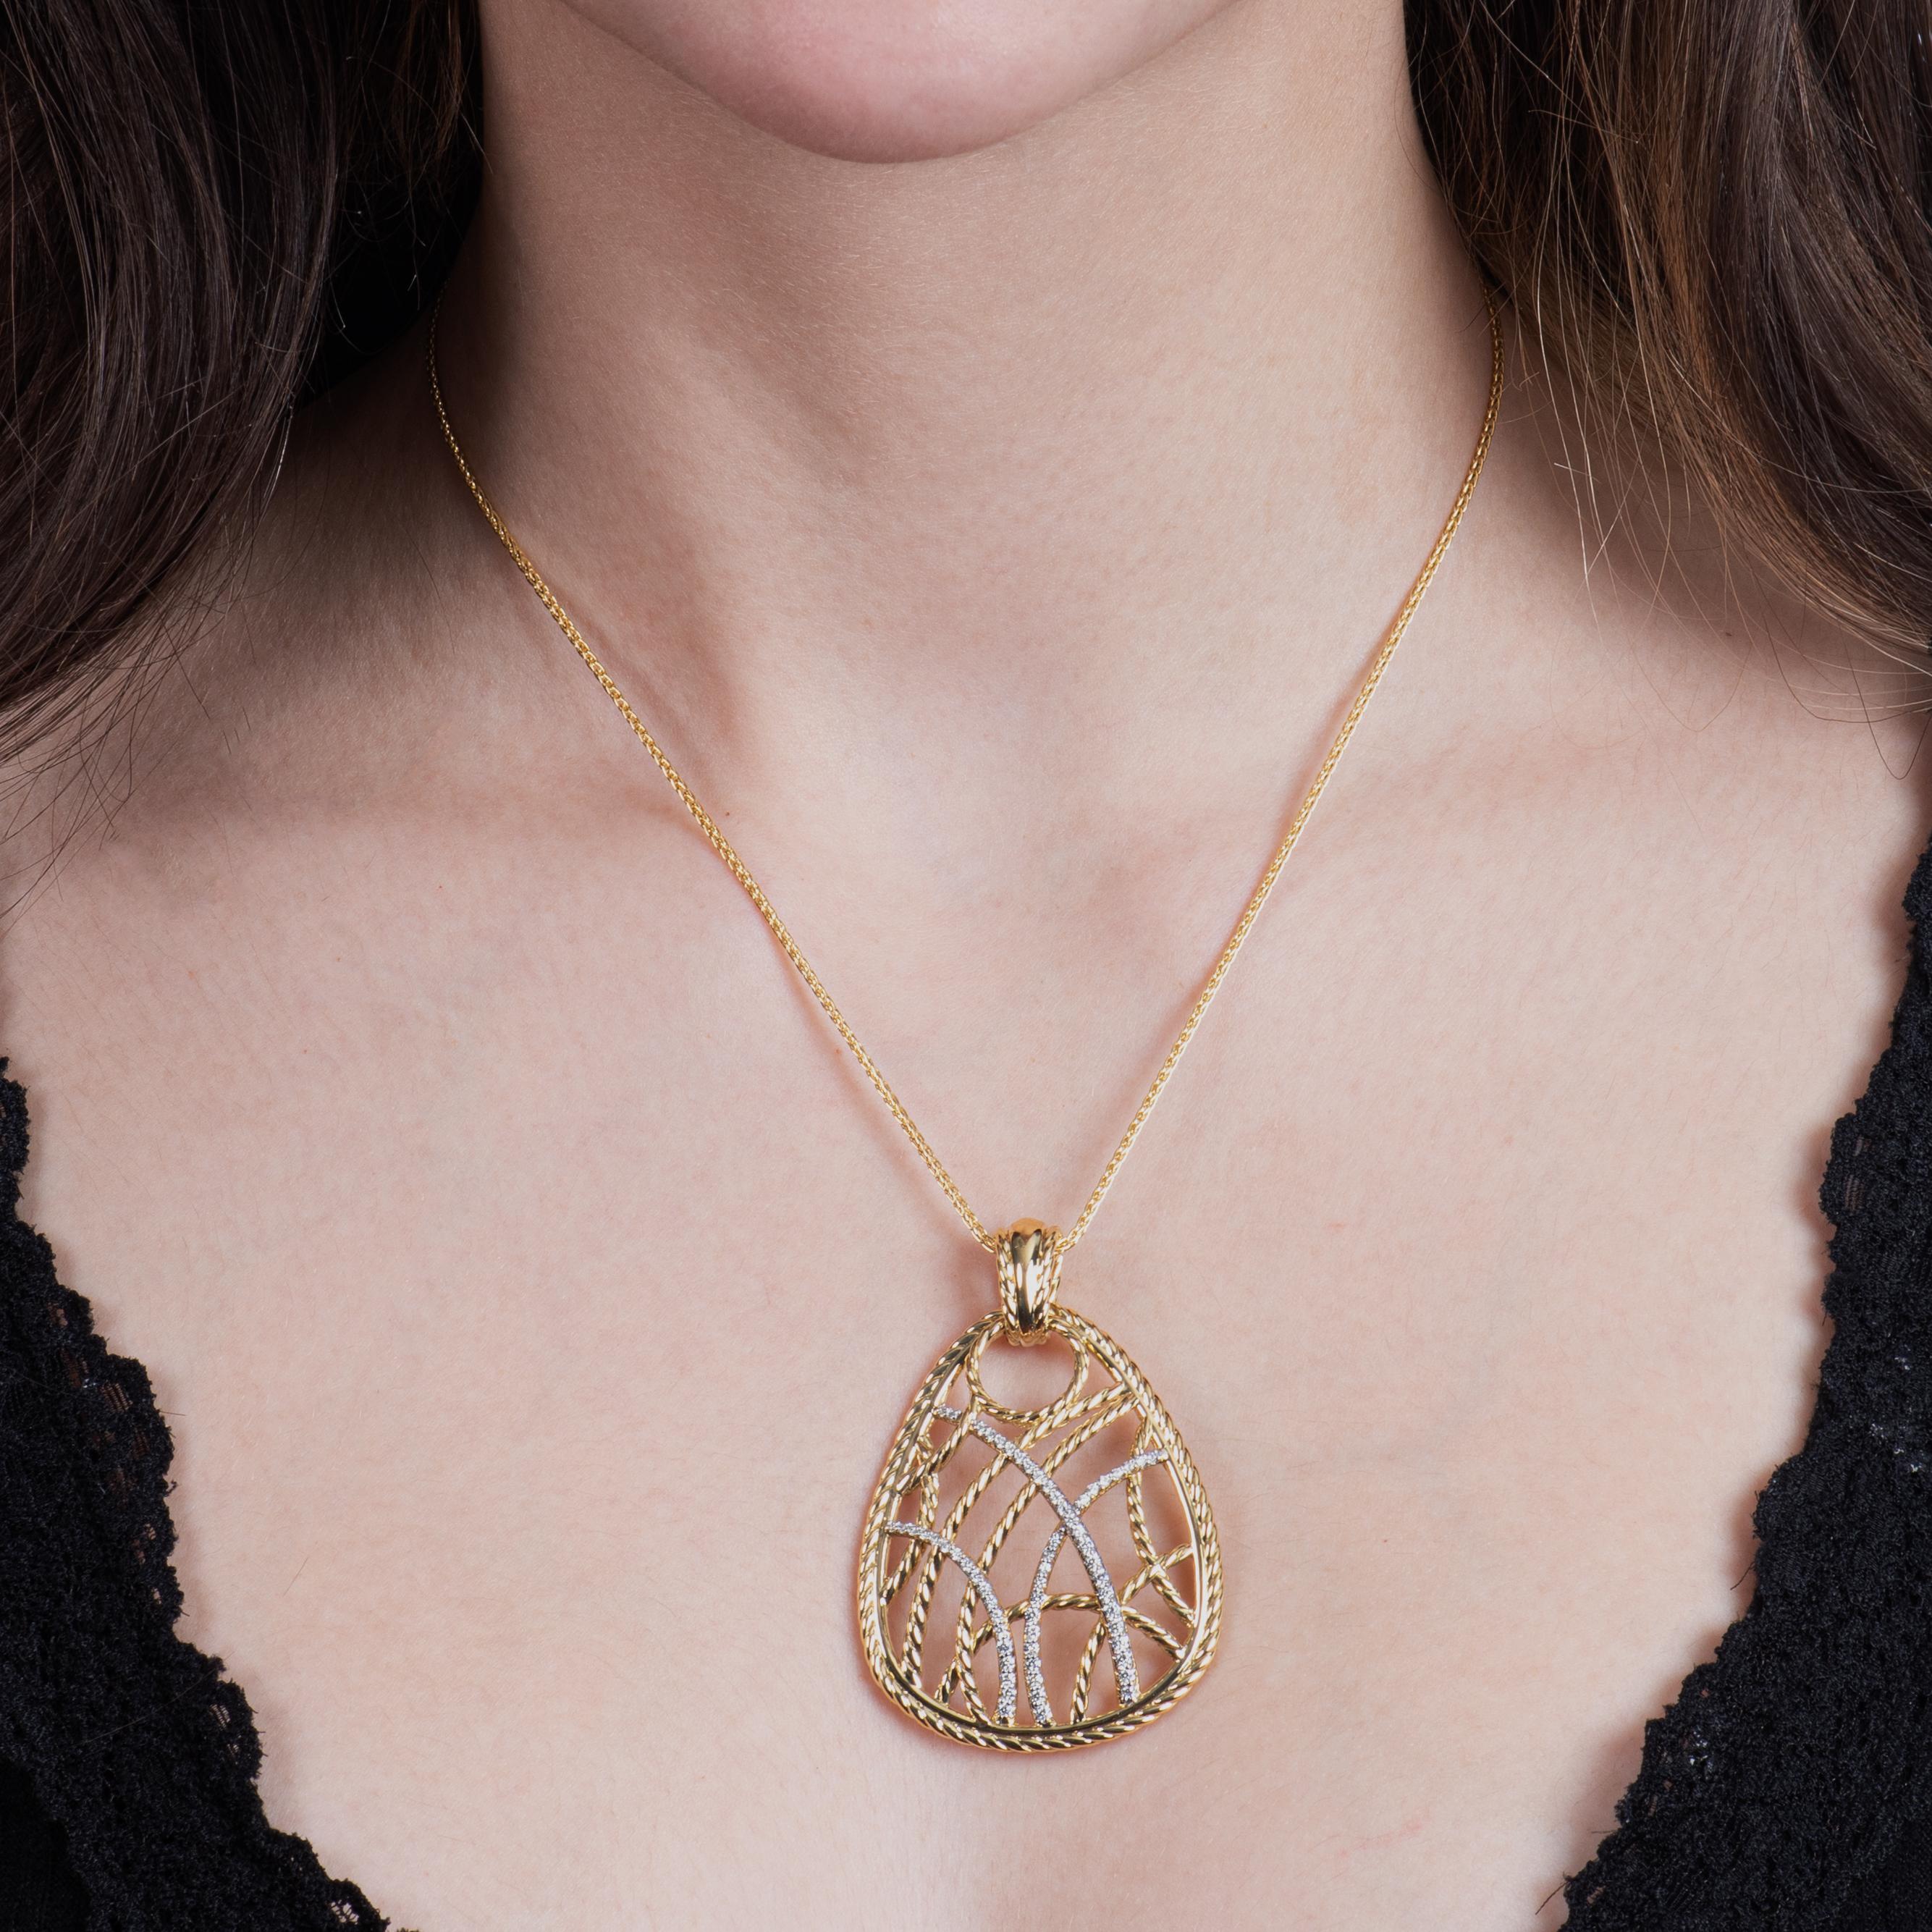 This beautiful David Yurman piece features an intricate design of intertwining cable ropes and 0.70ct total weight in round diamond accents, on a 16 inch 18kt yellow gold pendant. We currently have the matching earrings to this pendant; contact us